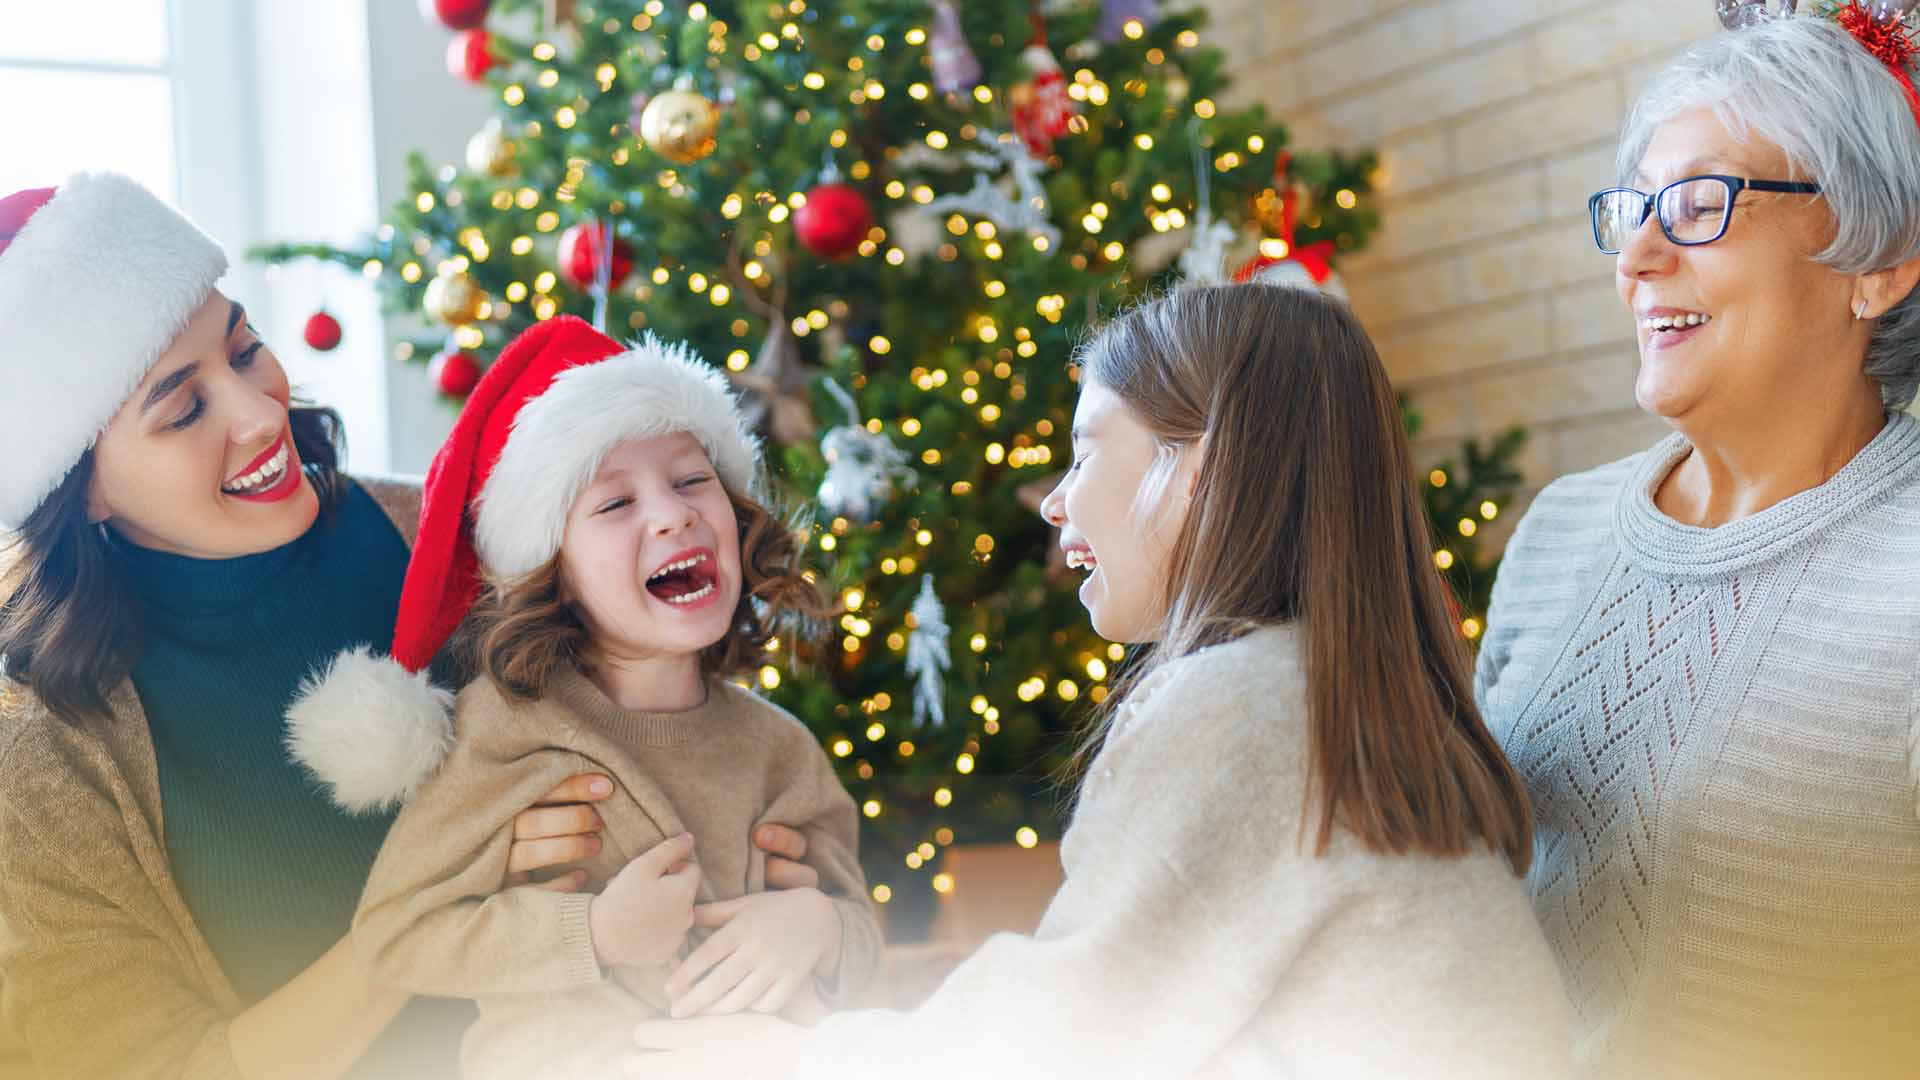 5 Activities to Bring Your Family Closer This Christmas